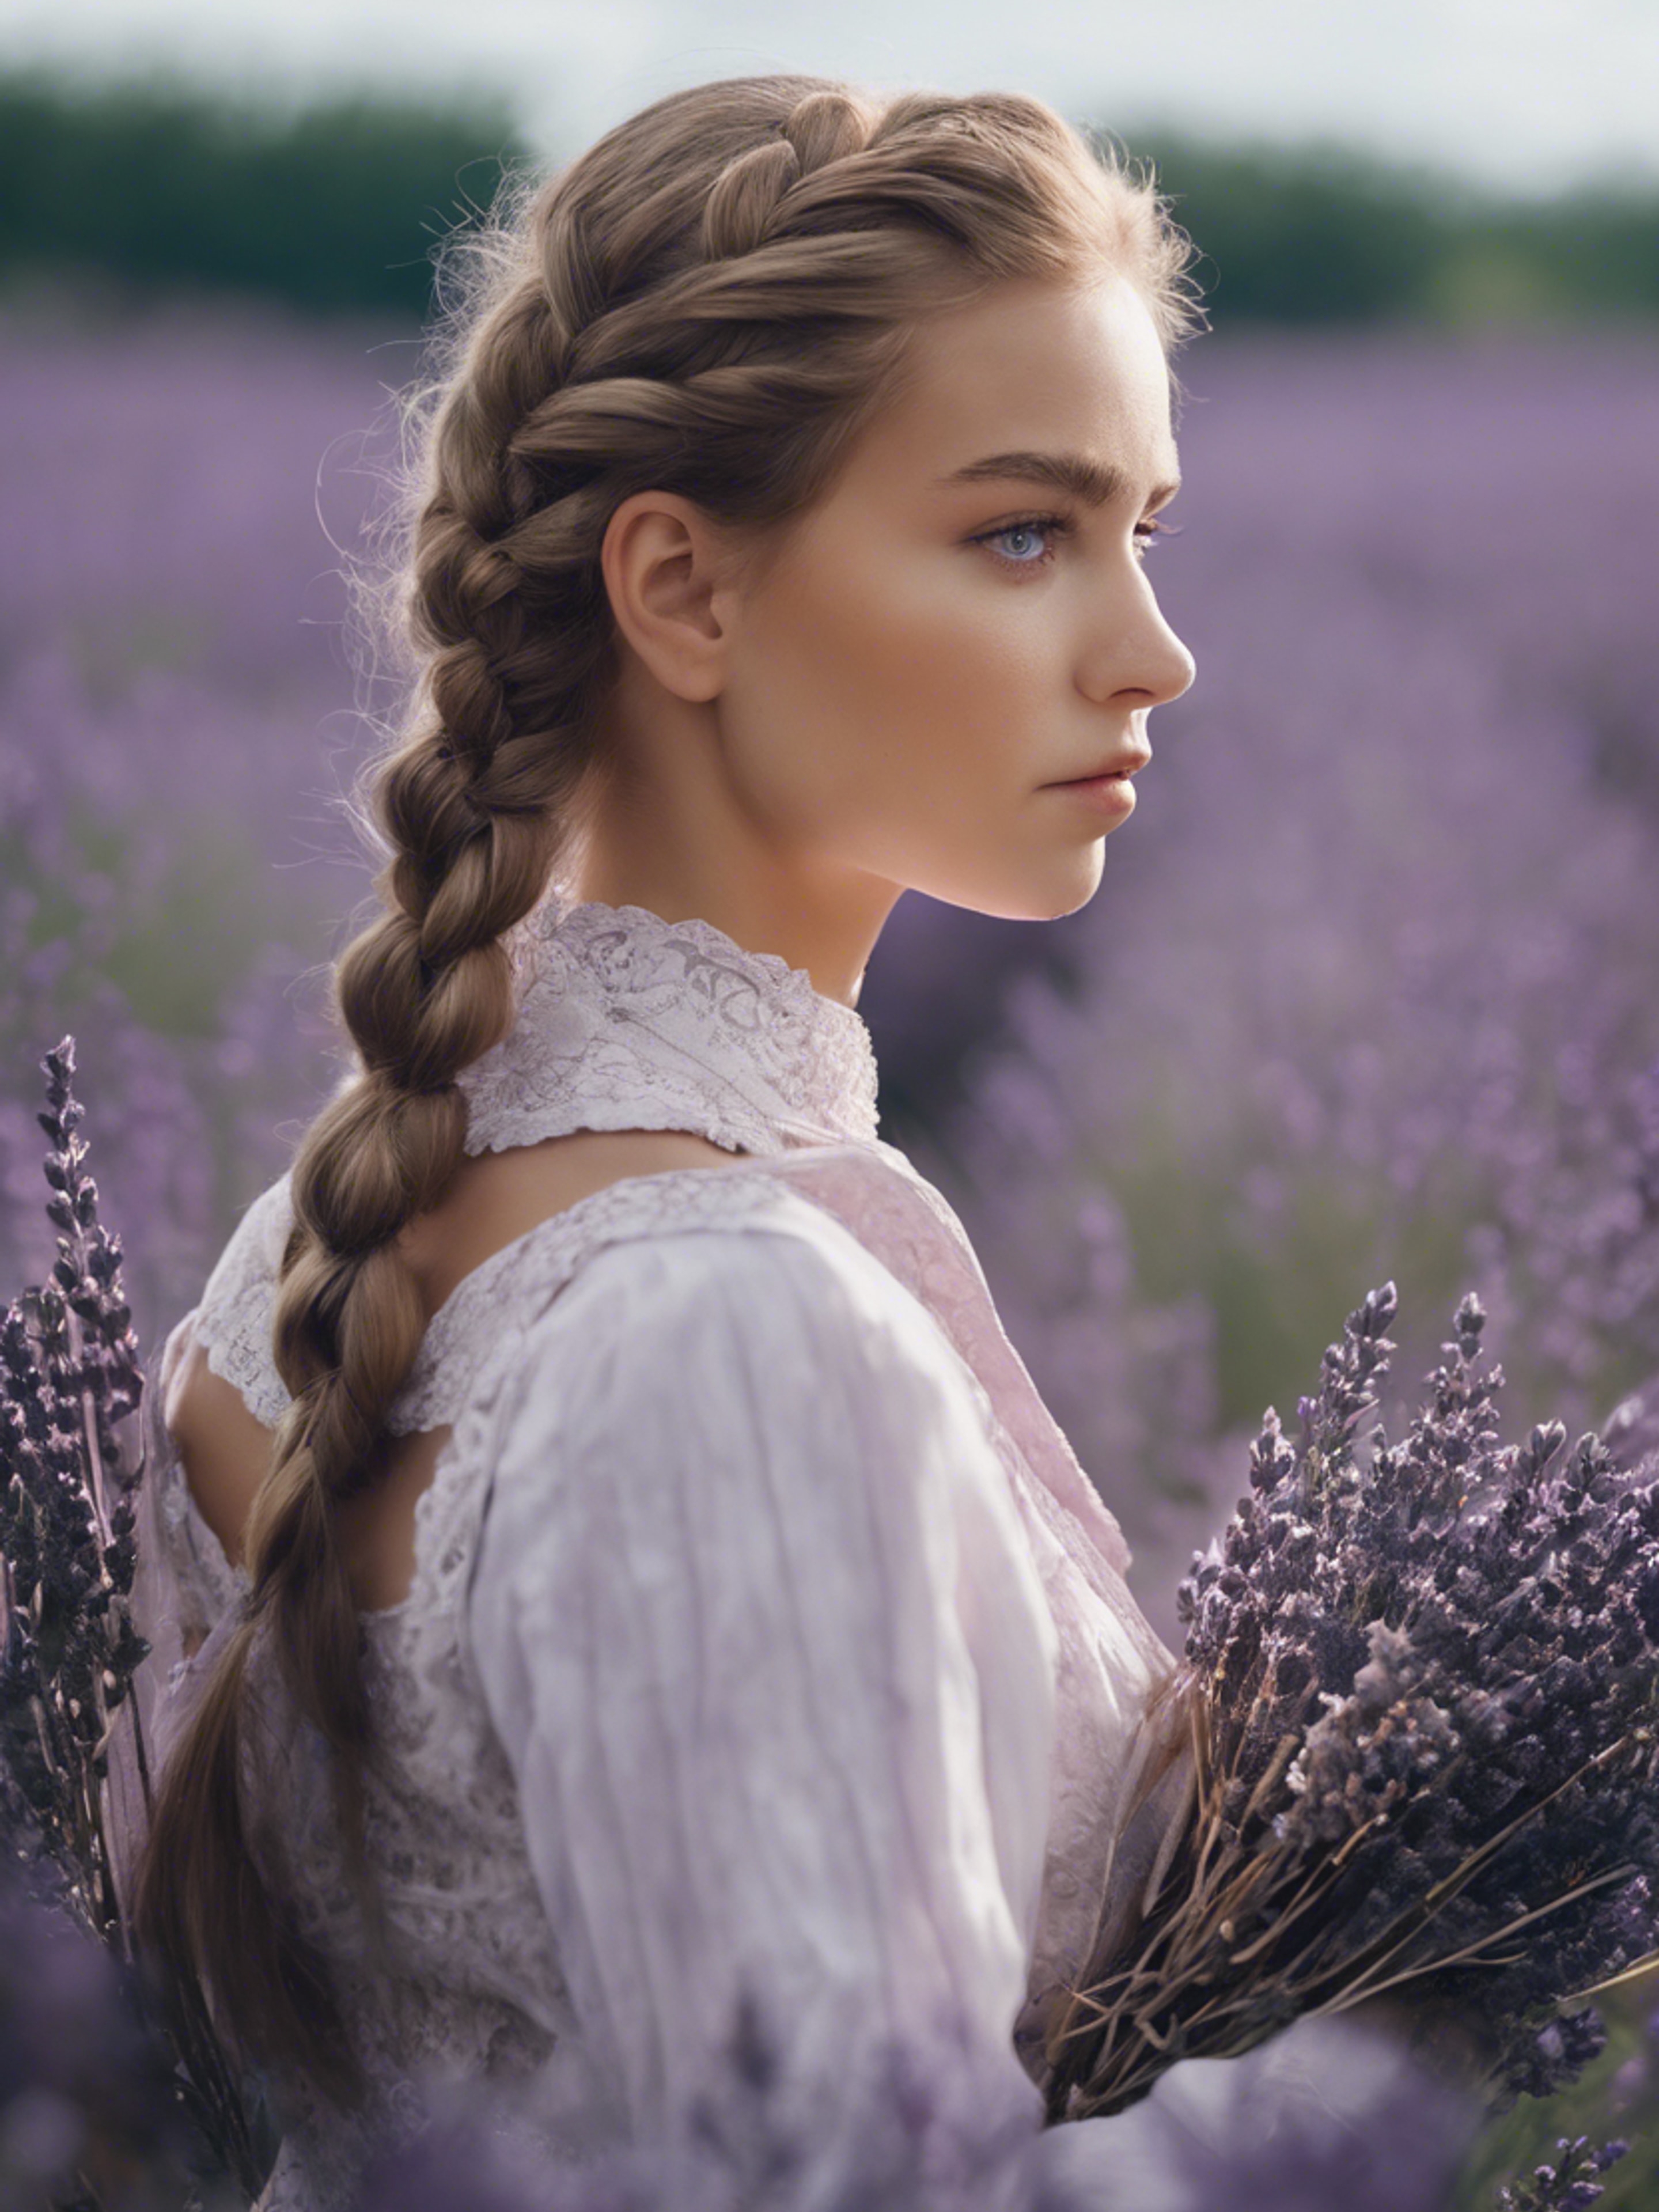 A pretty, light-eyed girl with her hair done in classic French braid, surrounded by a field of French lavender. Hình nền[c71d23e36c7041a09435]